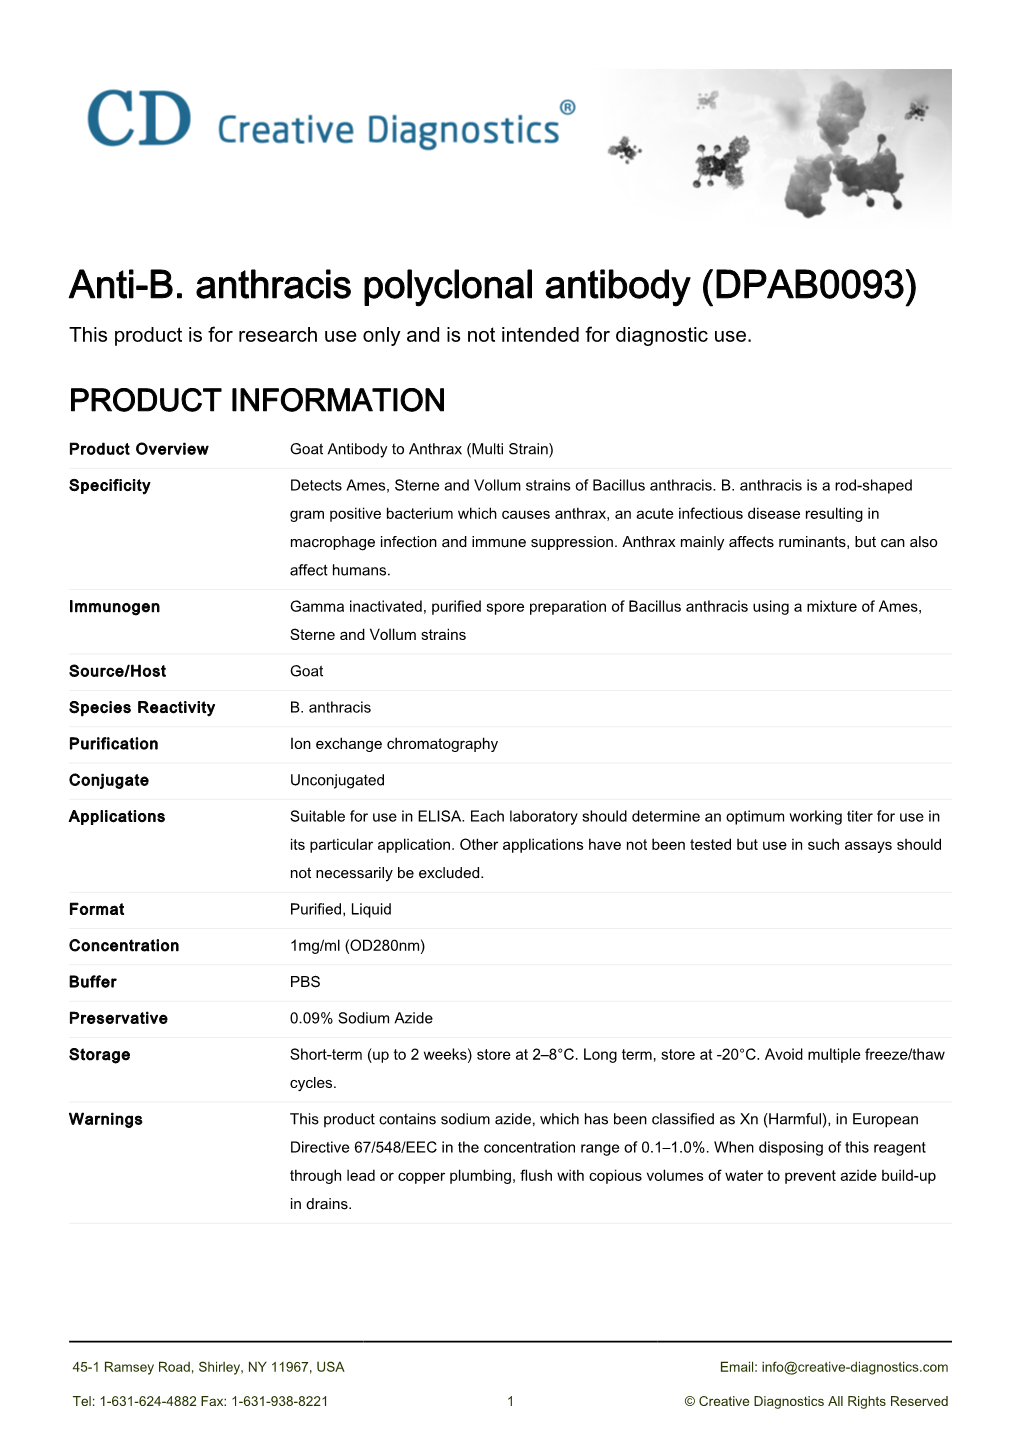 Anti-B. Anthracis Polyclonal Antibody (DPAB0093) This Product Is for Research Use Only and Is Not Intended for Diagnostic Use